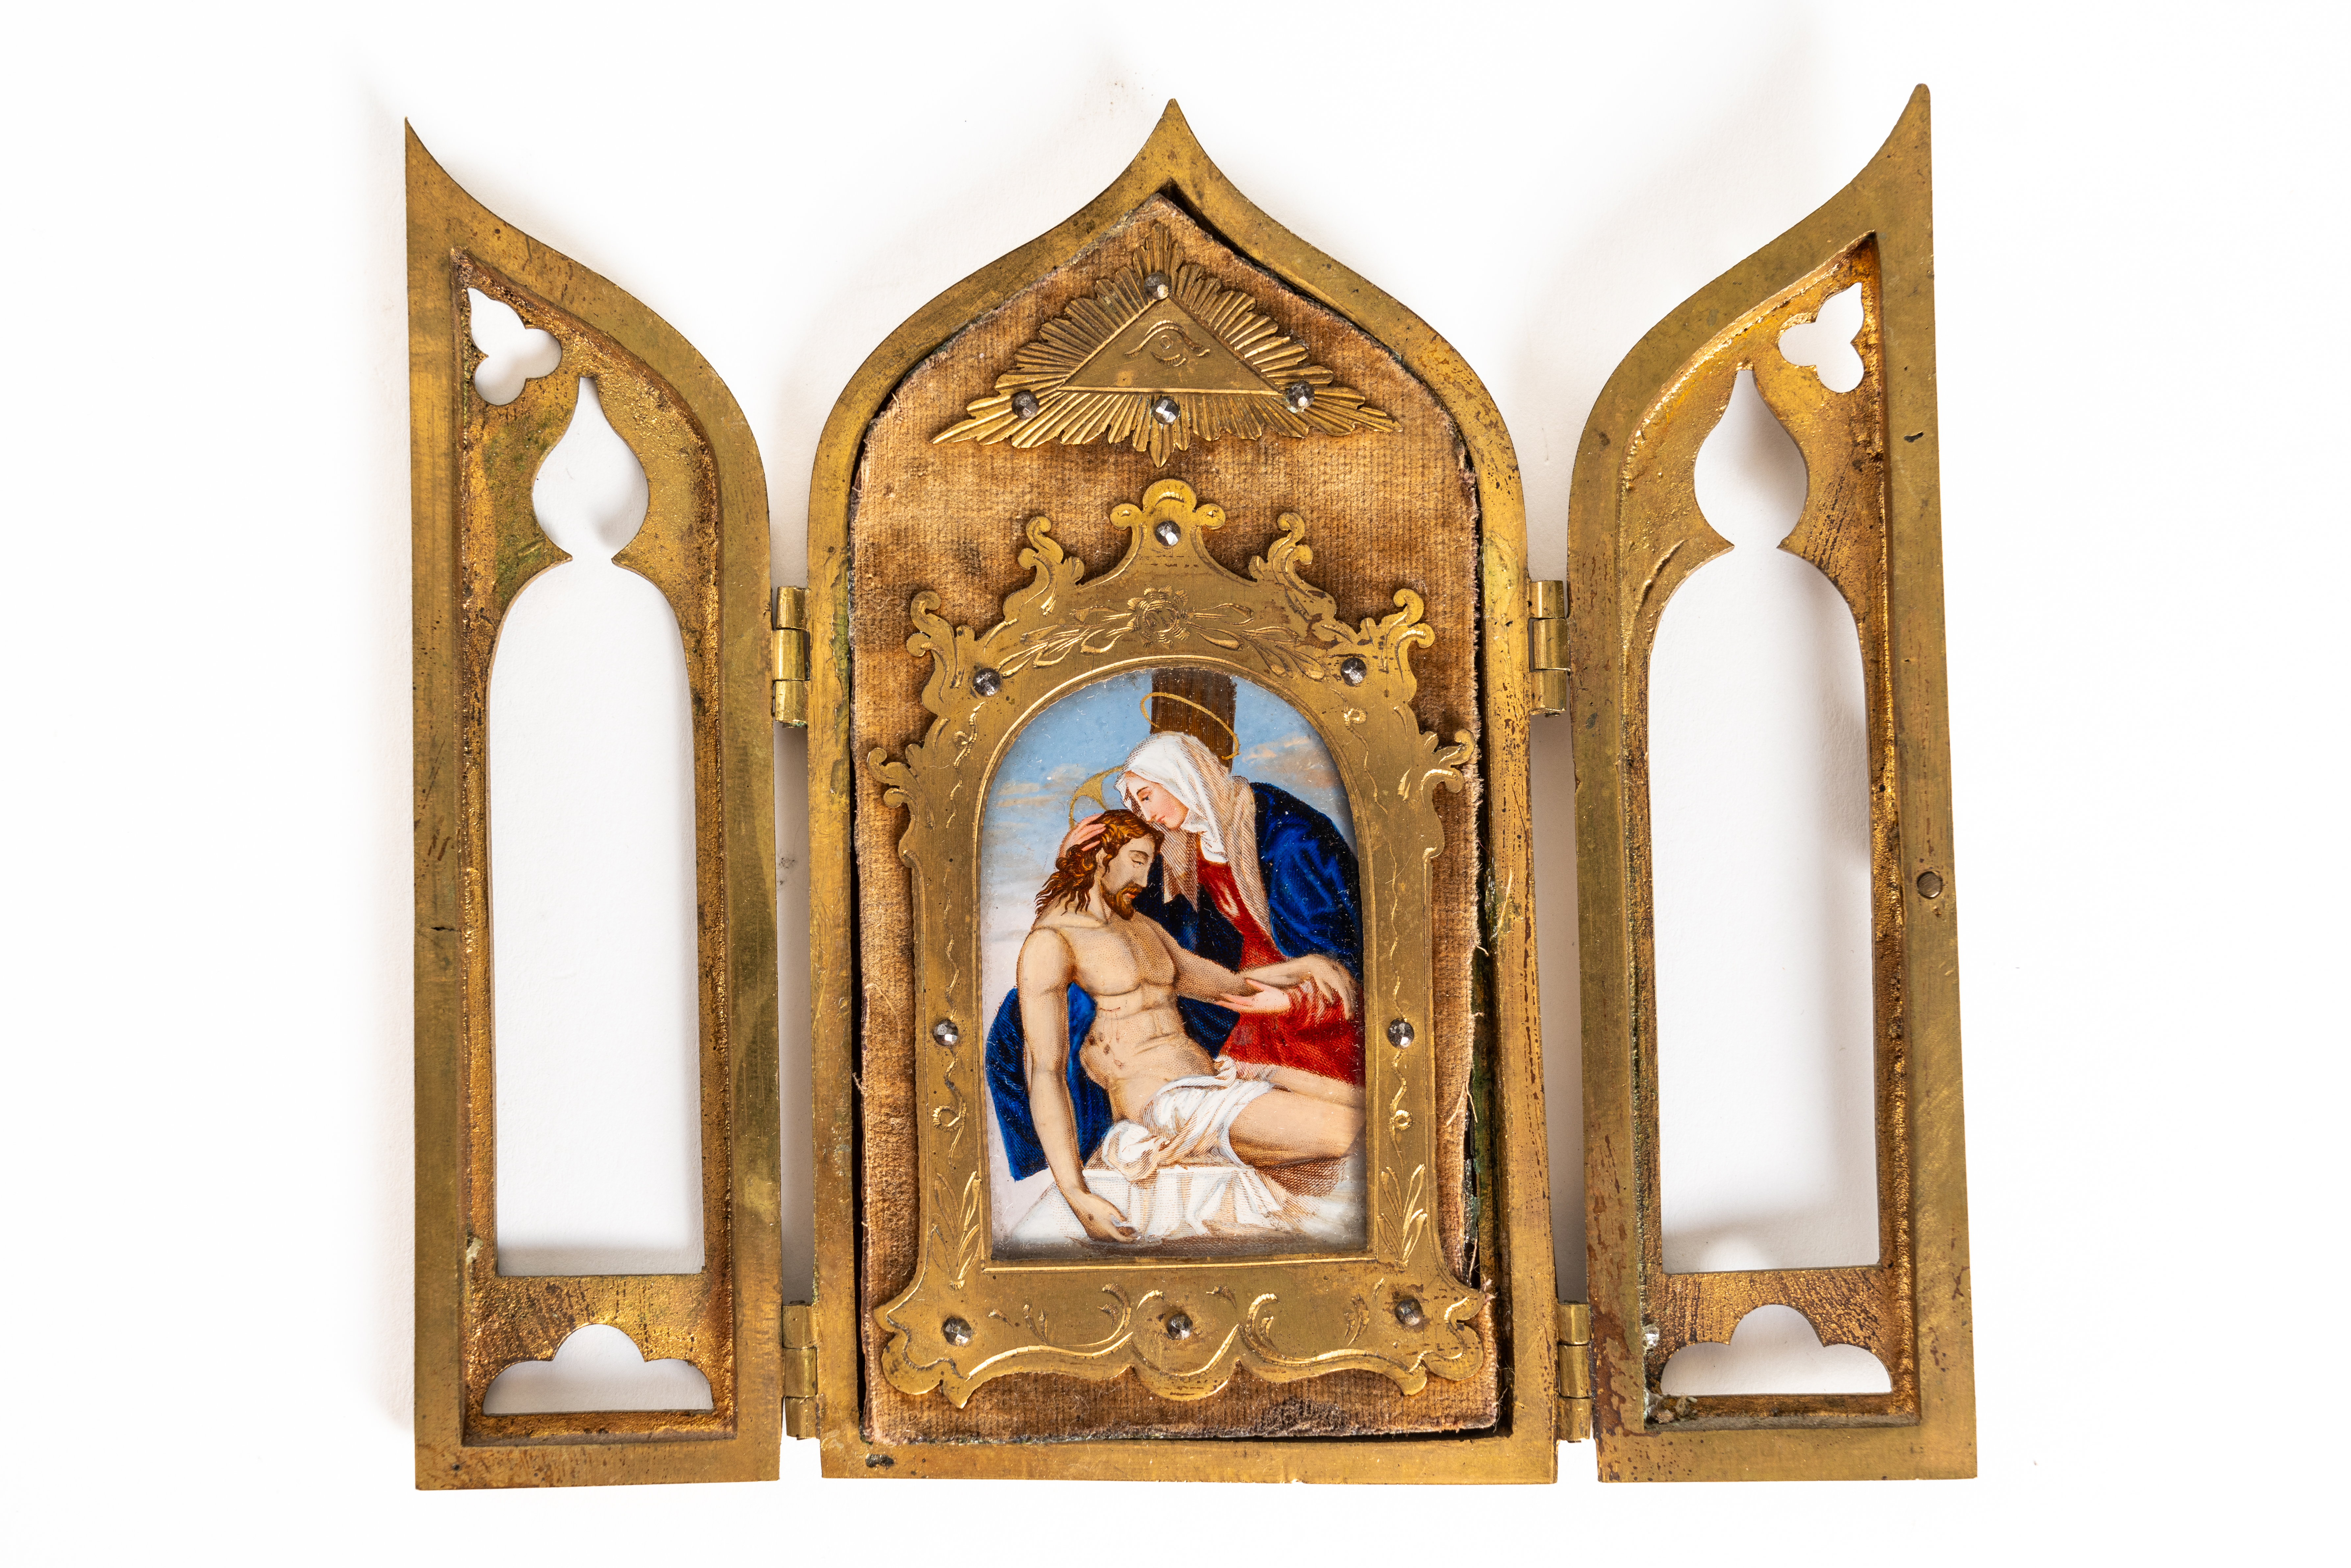 A EUROPEAN ENAMEL AND GILT-BRASS TRIPTYCH DEPICTING THE PIETA AND A RUSSIAN ENAMEL ICON (3) - Image 2 of 6